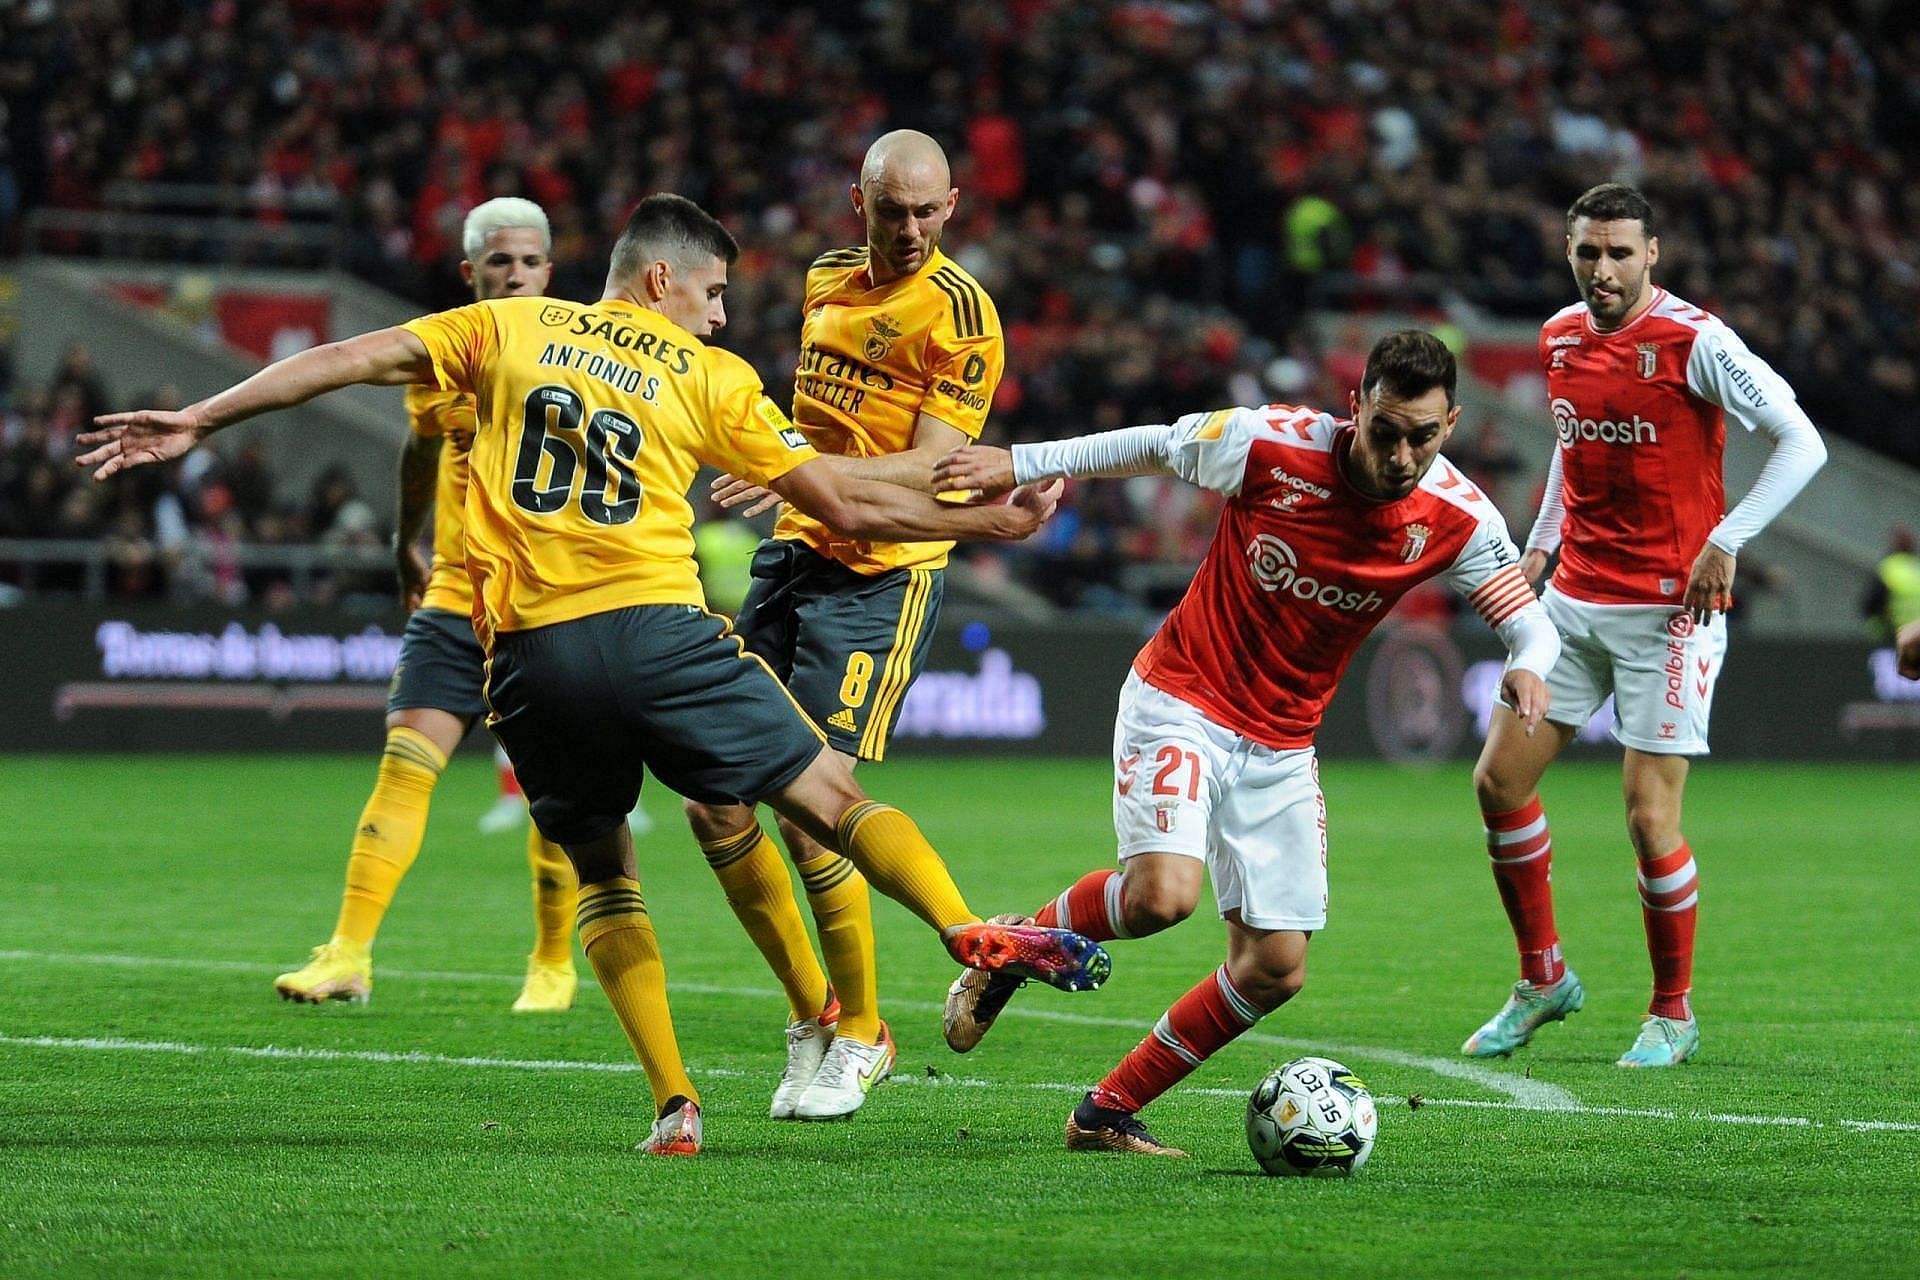 Benfica and Braga will lock horns in the Taca de Portugal on Wednesday